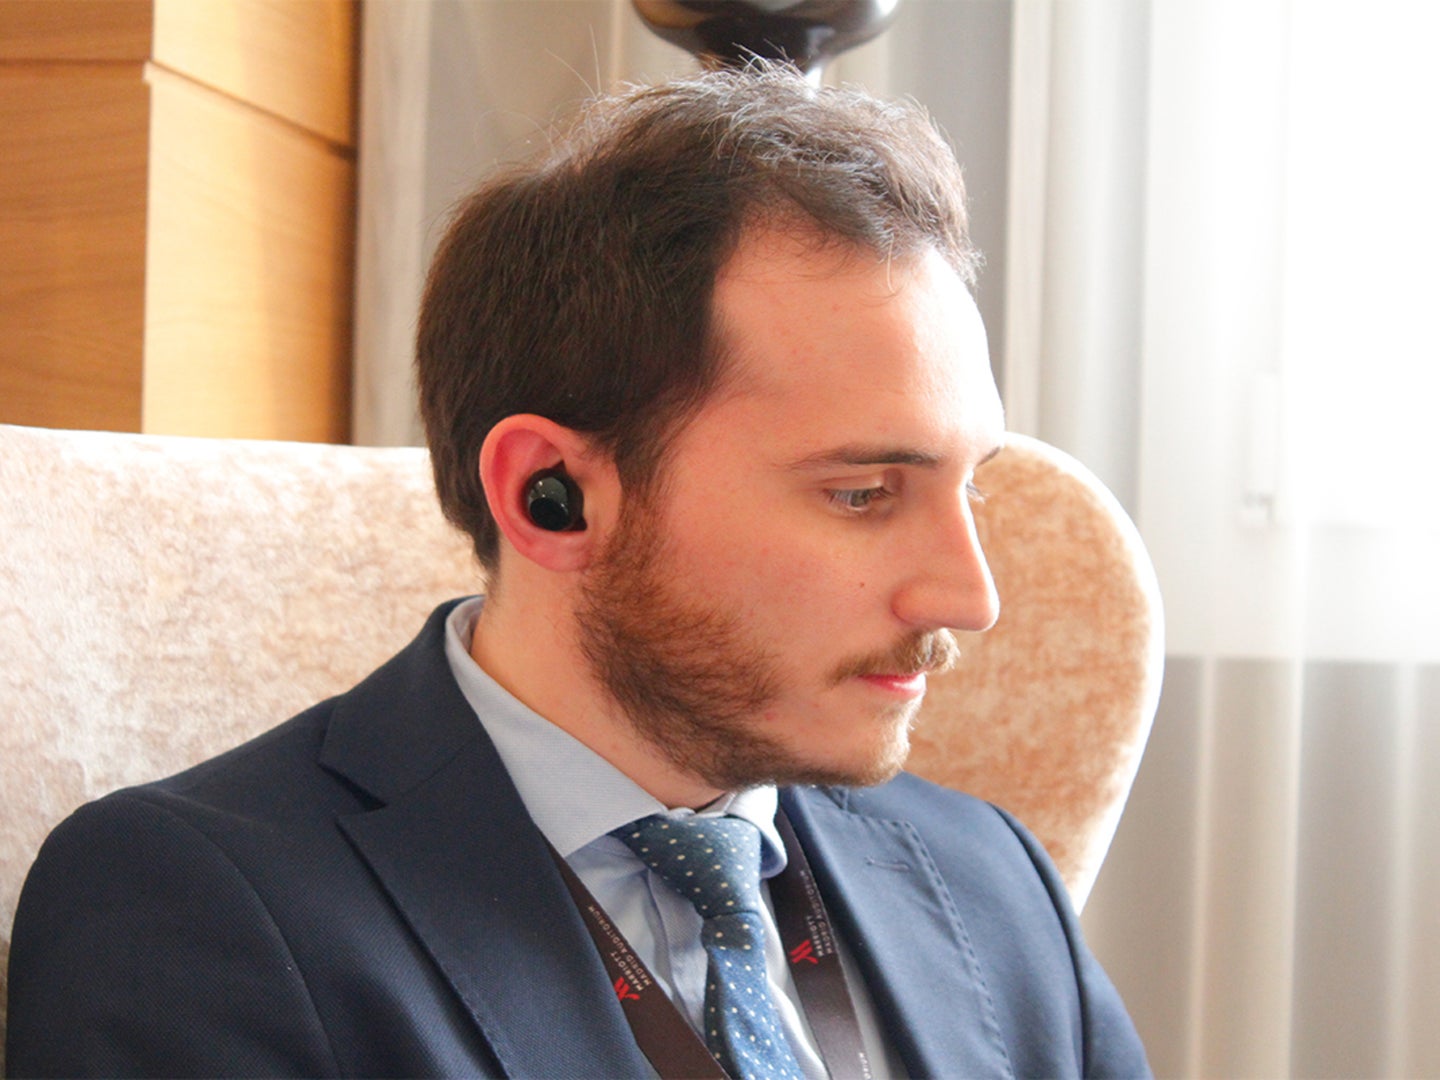 A person using translation earbuds